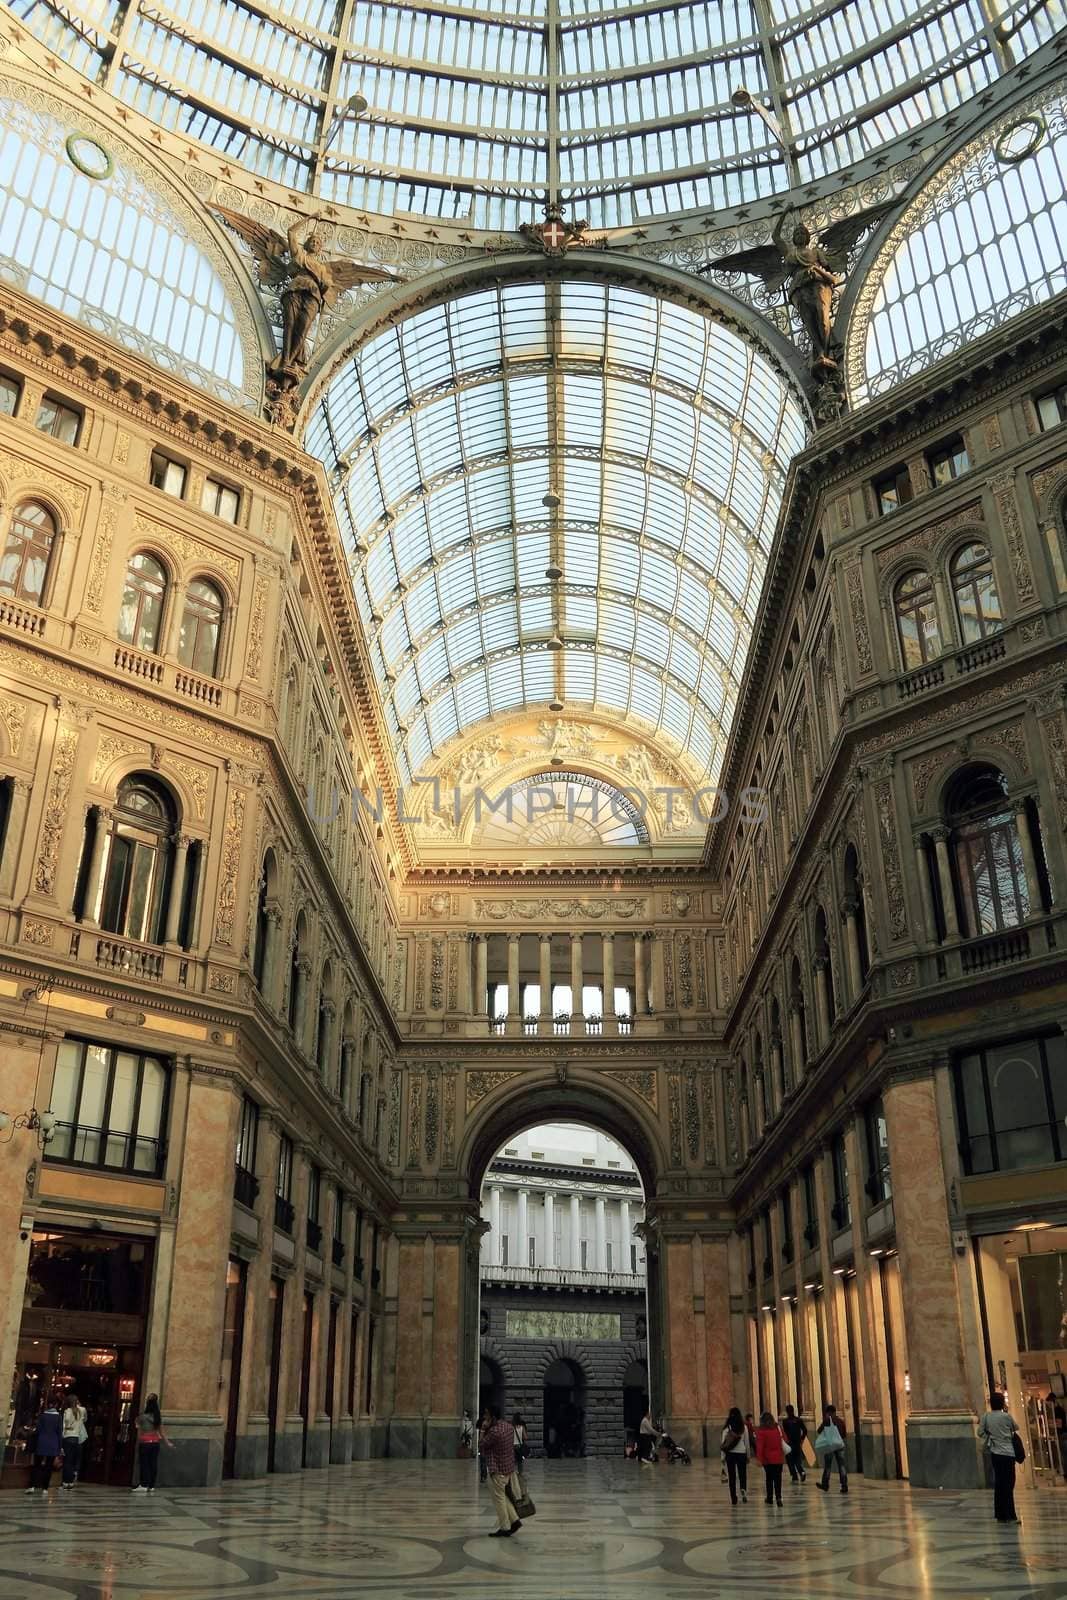 Inside view of the roof of the Galleria Umberto in Naples, Italy.